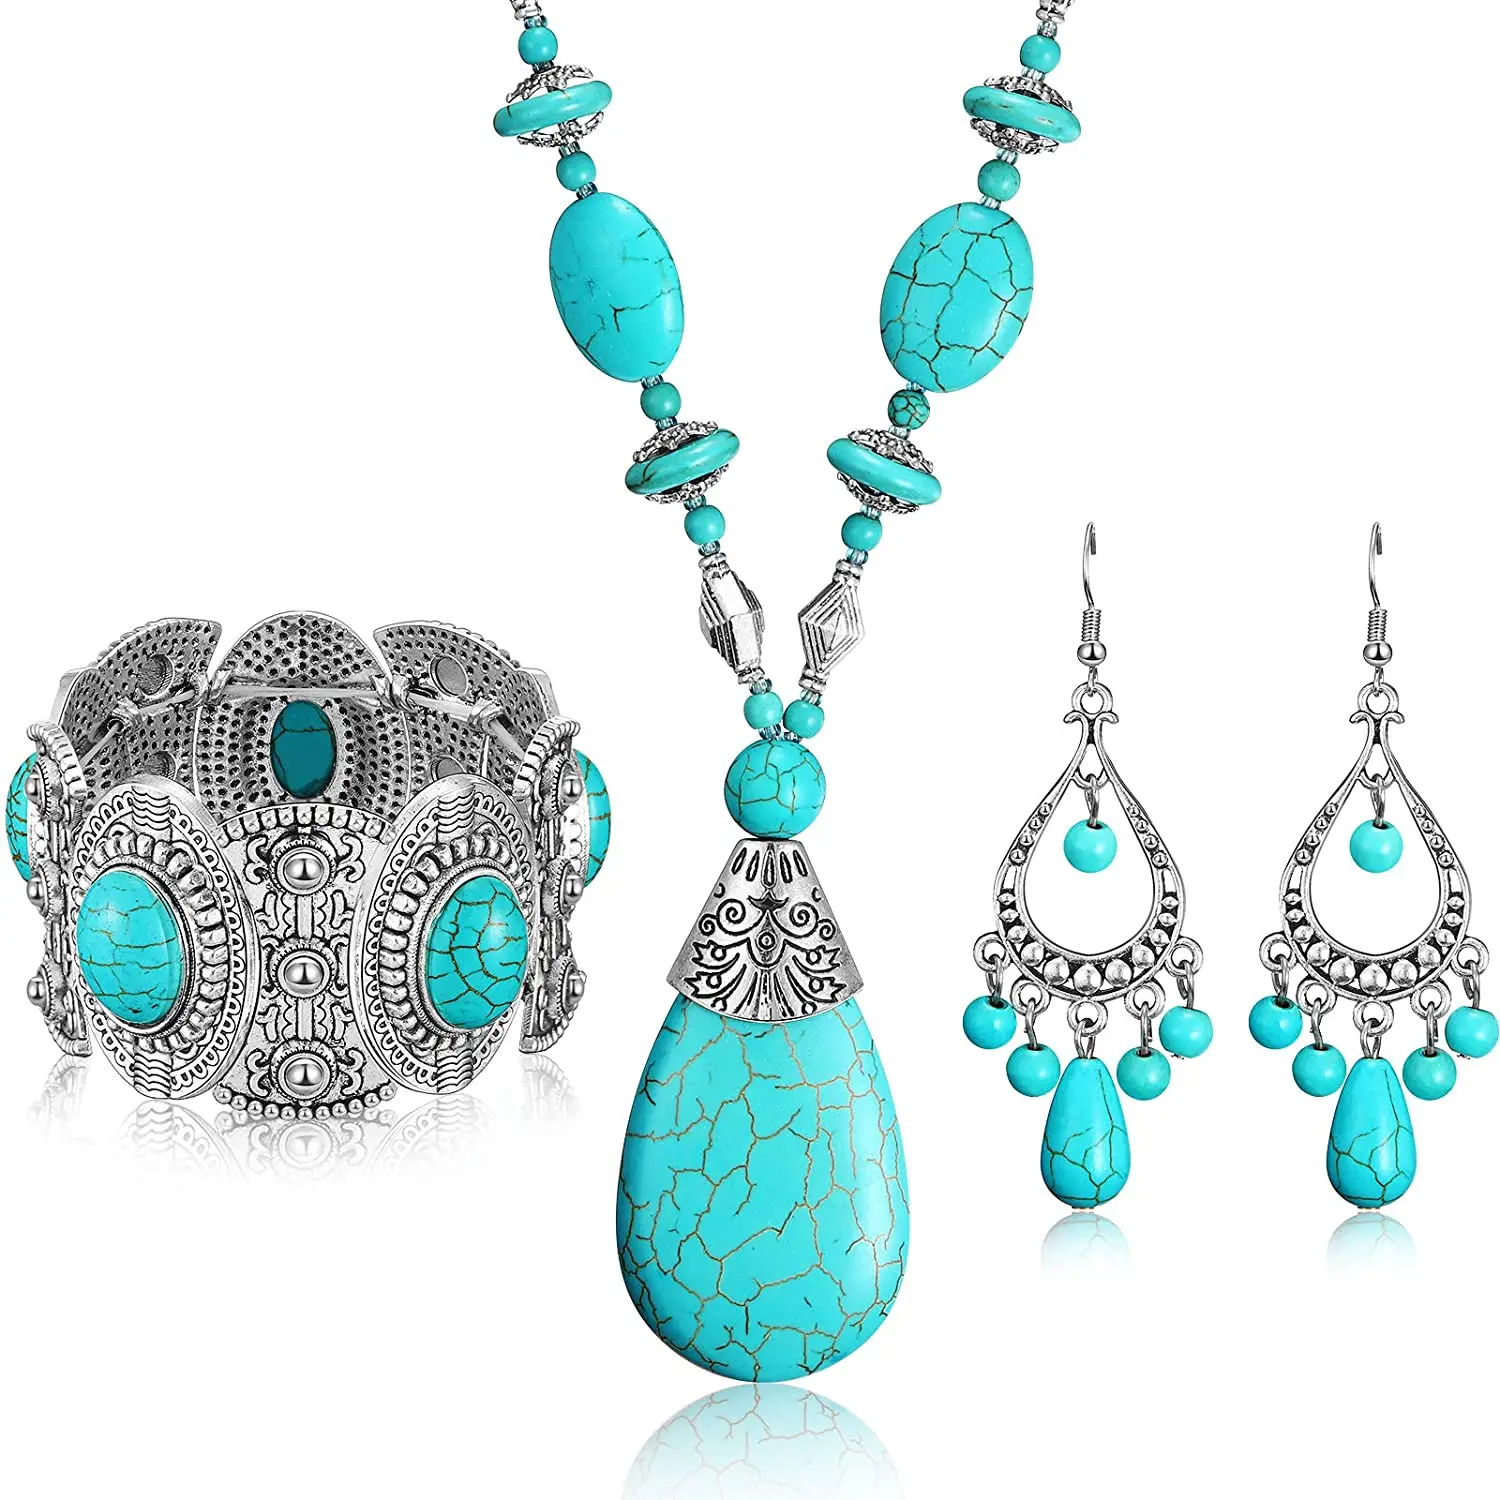 

4 Pieces Bohemian Turquoise Pendant Necklace Jewelry Sets for Women Necklace Dangle Earrings Stretchable Bracelet Statement Gift